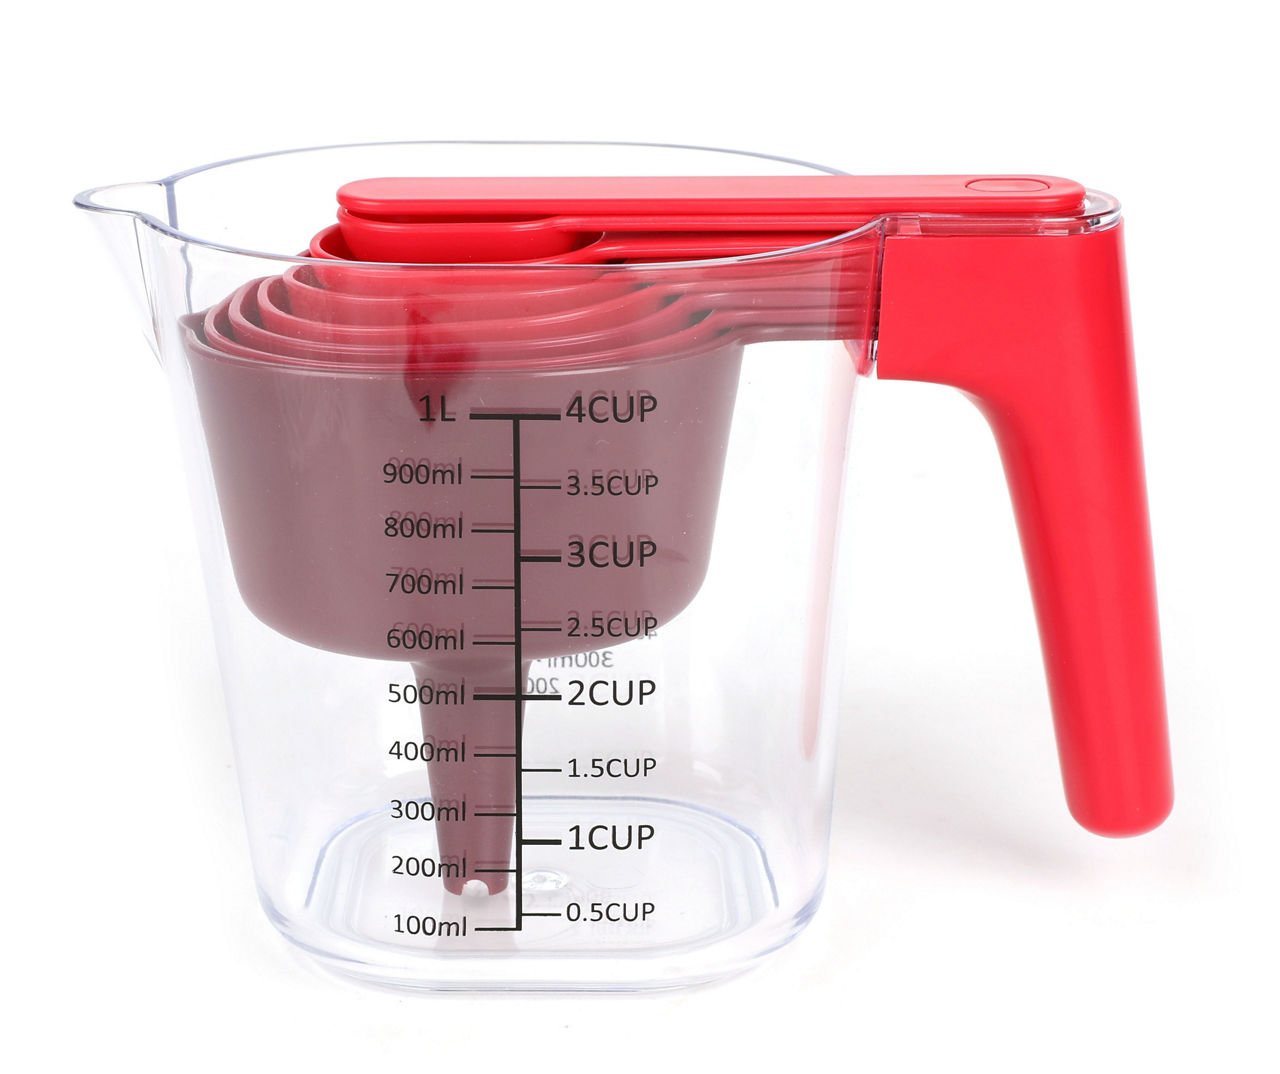 KitchenAid® Measuring Cup+Spoons, Color: Red - JCPenney